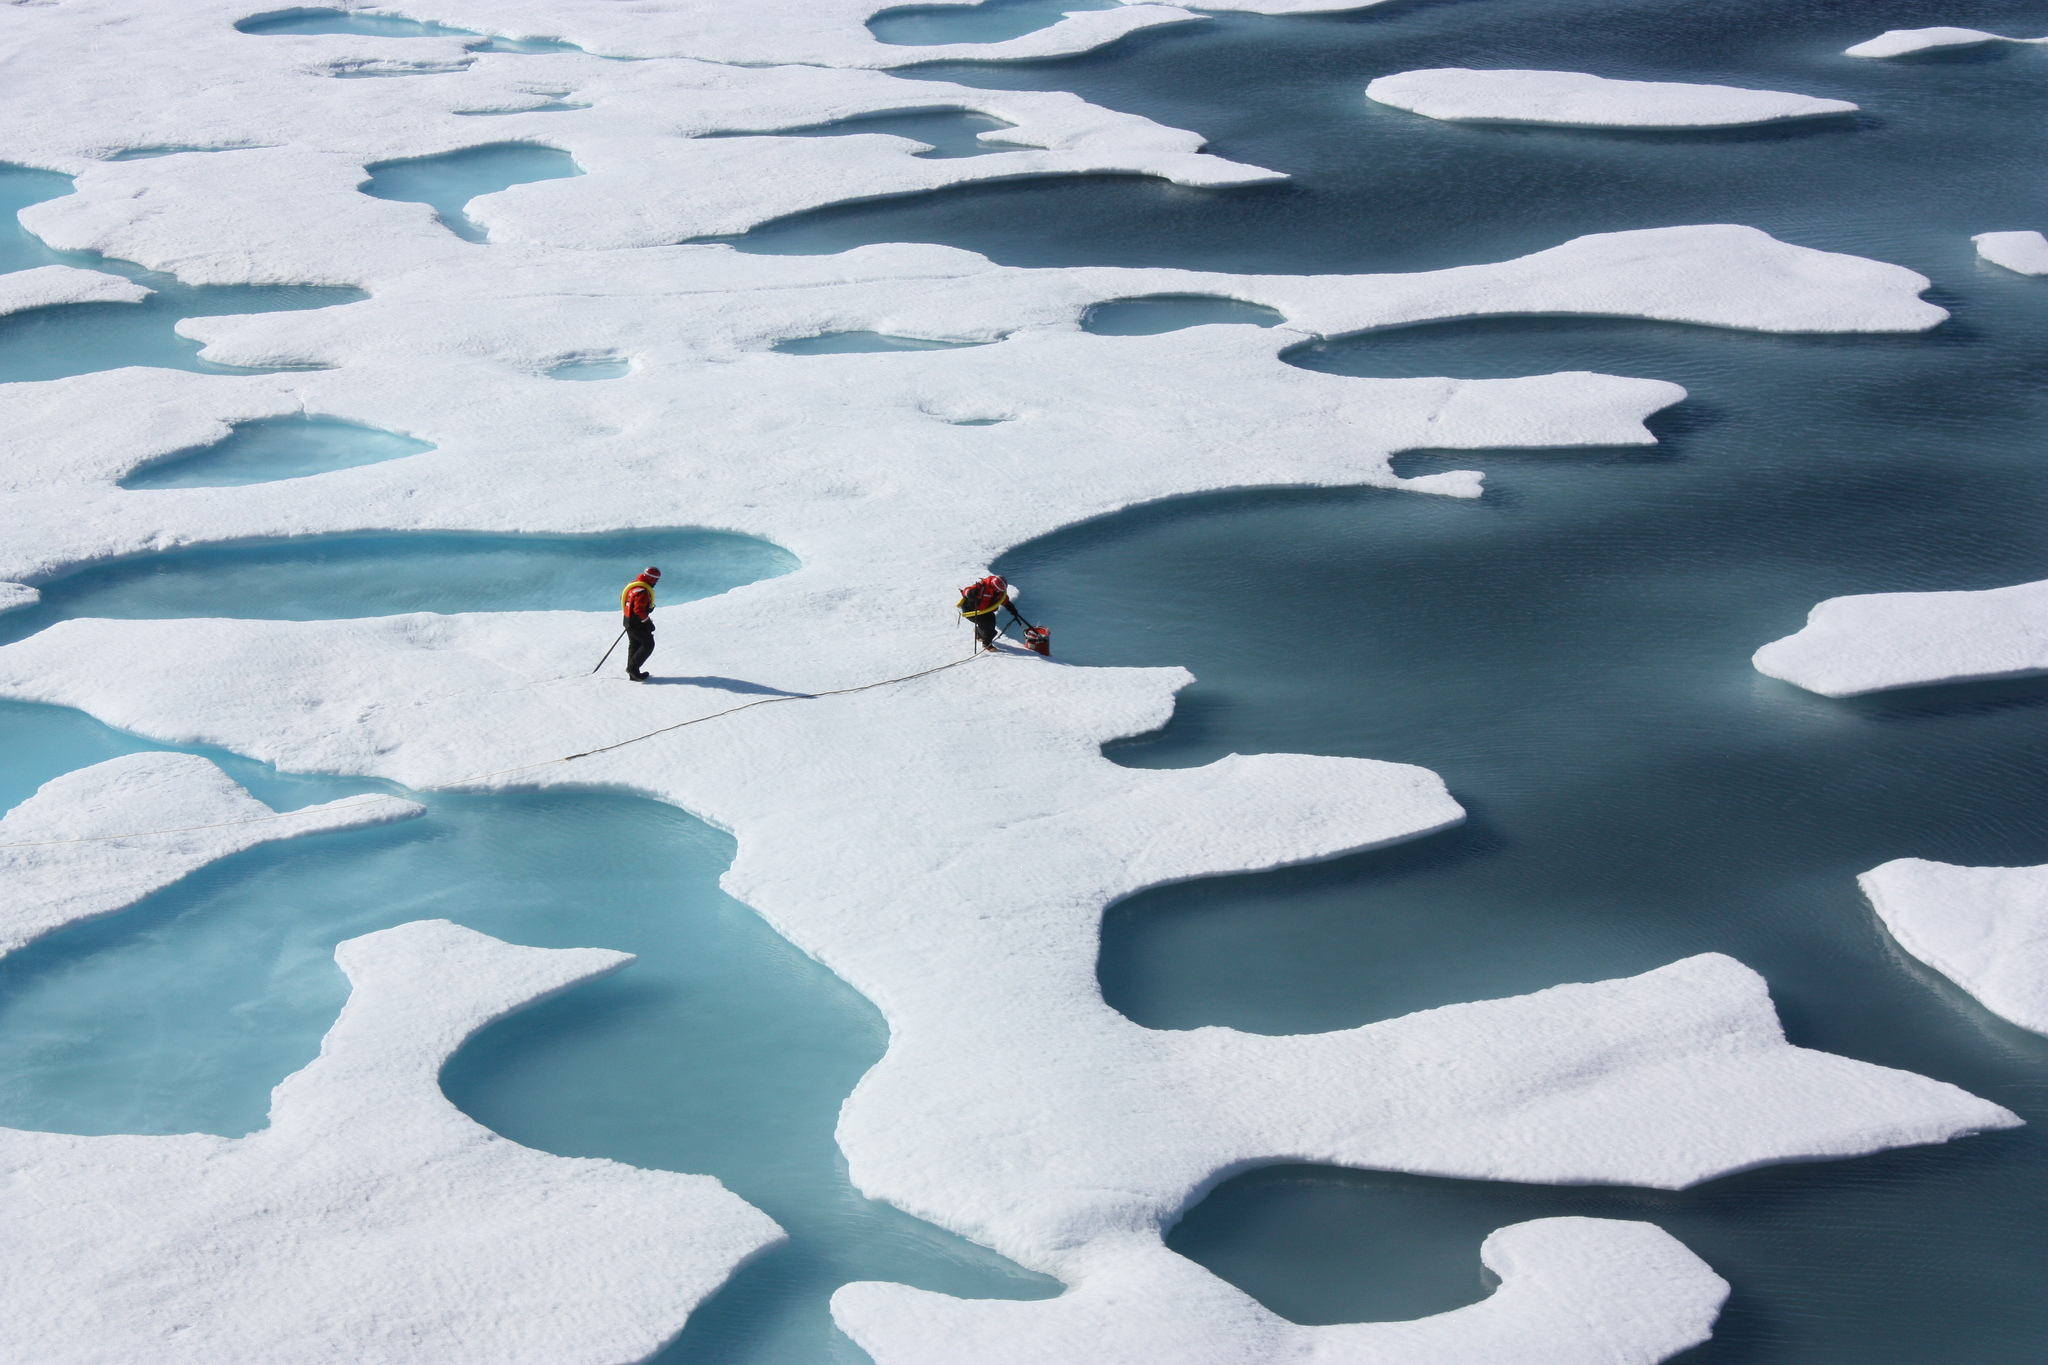 two people stand on ice sheets, some parts are melted. Blue water is visible everywhere the ice is not